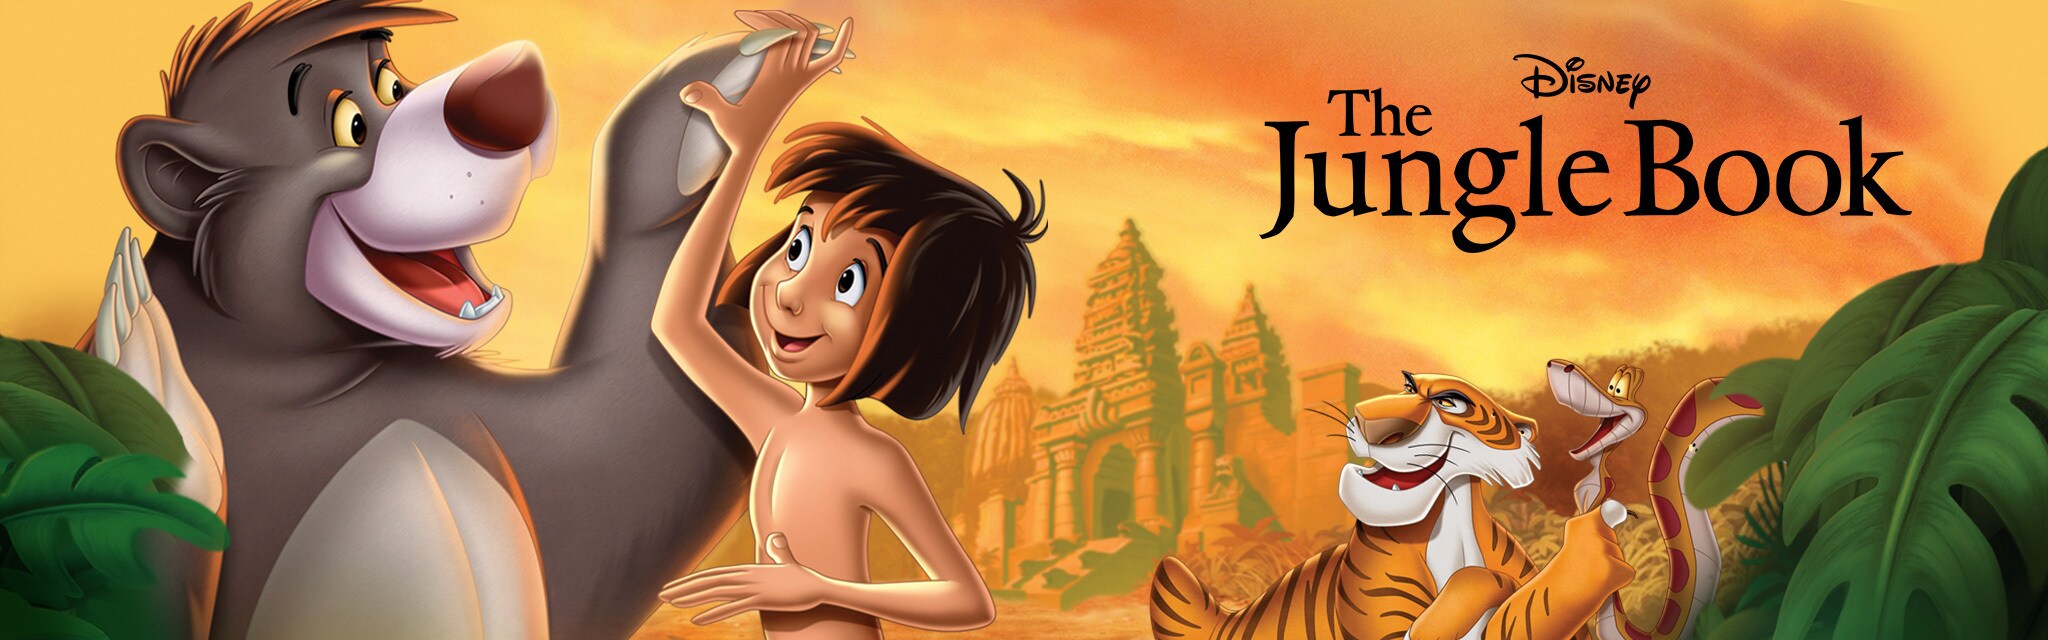 The Jungle Book 2016 123movies